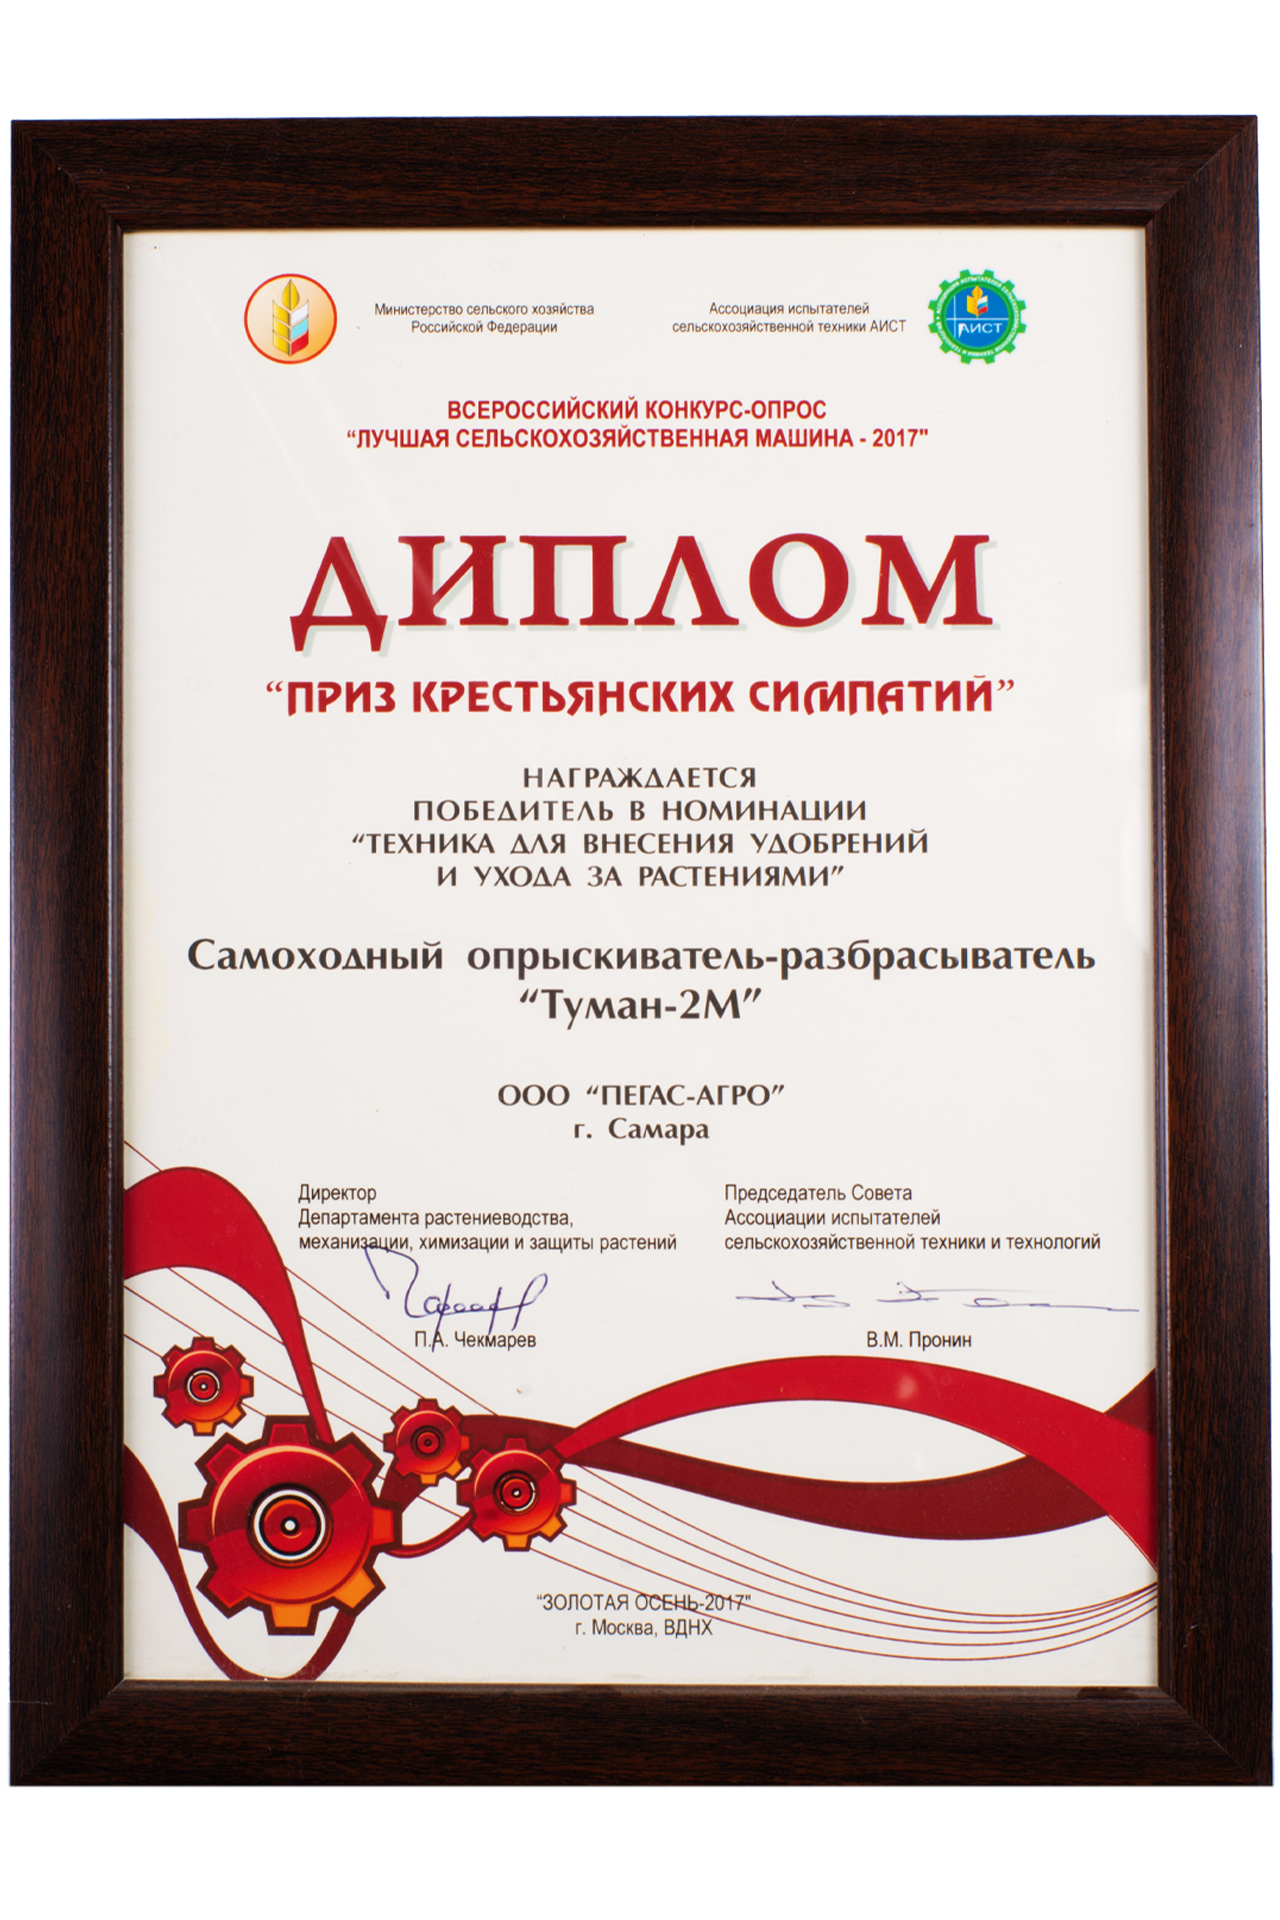 Winner Diploma of the Exhibition “Golden Autumn — 2017” for “Equipment for fertilization and plant care”, Moscow